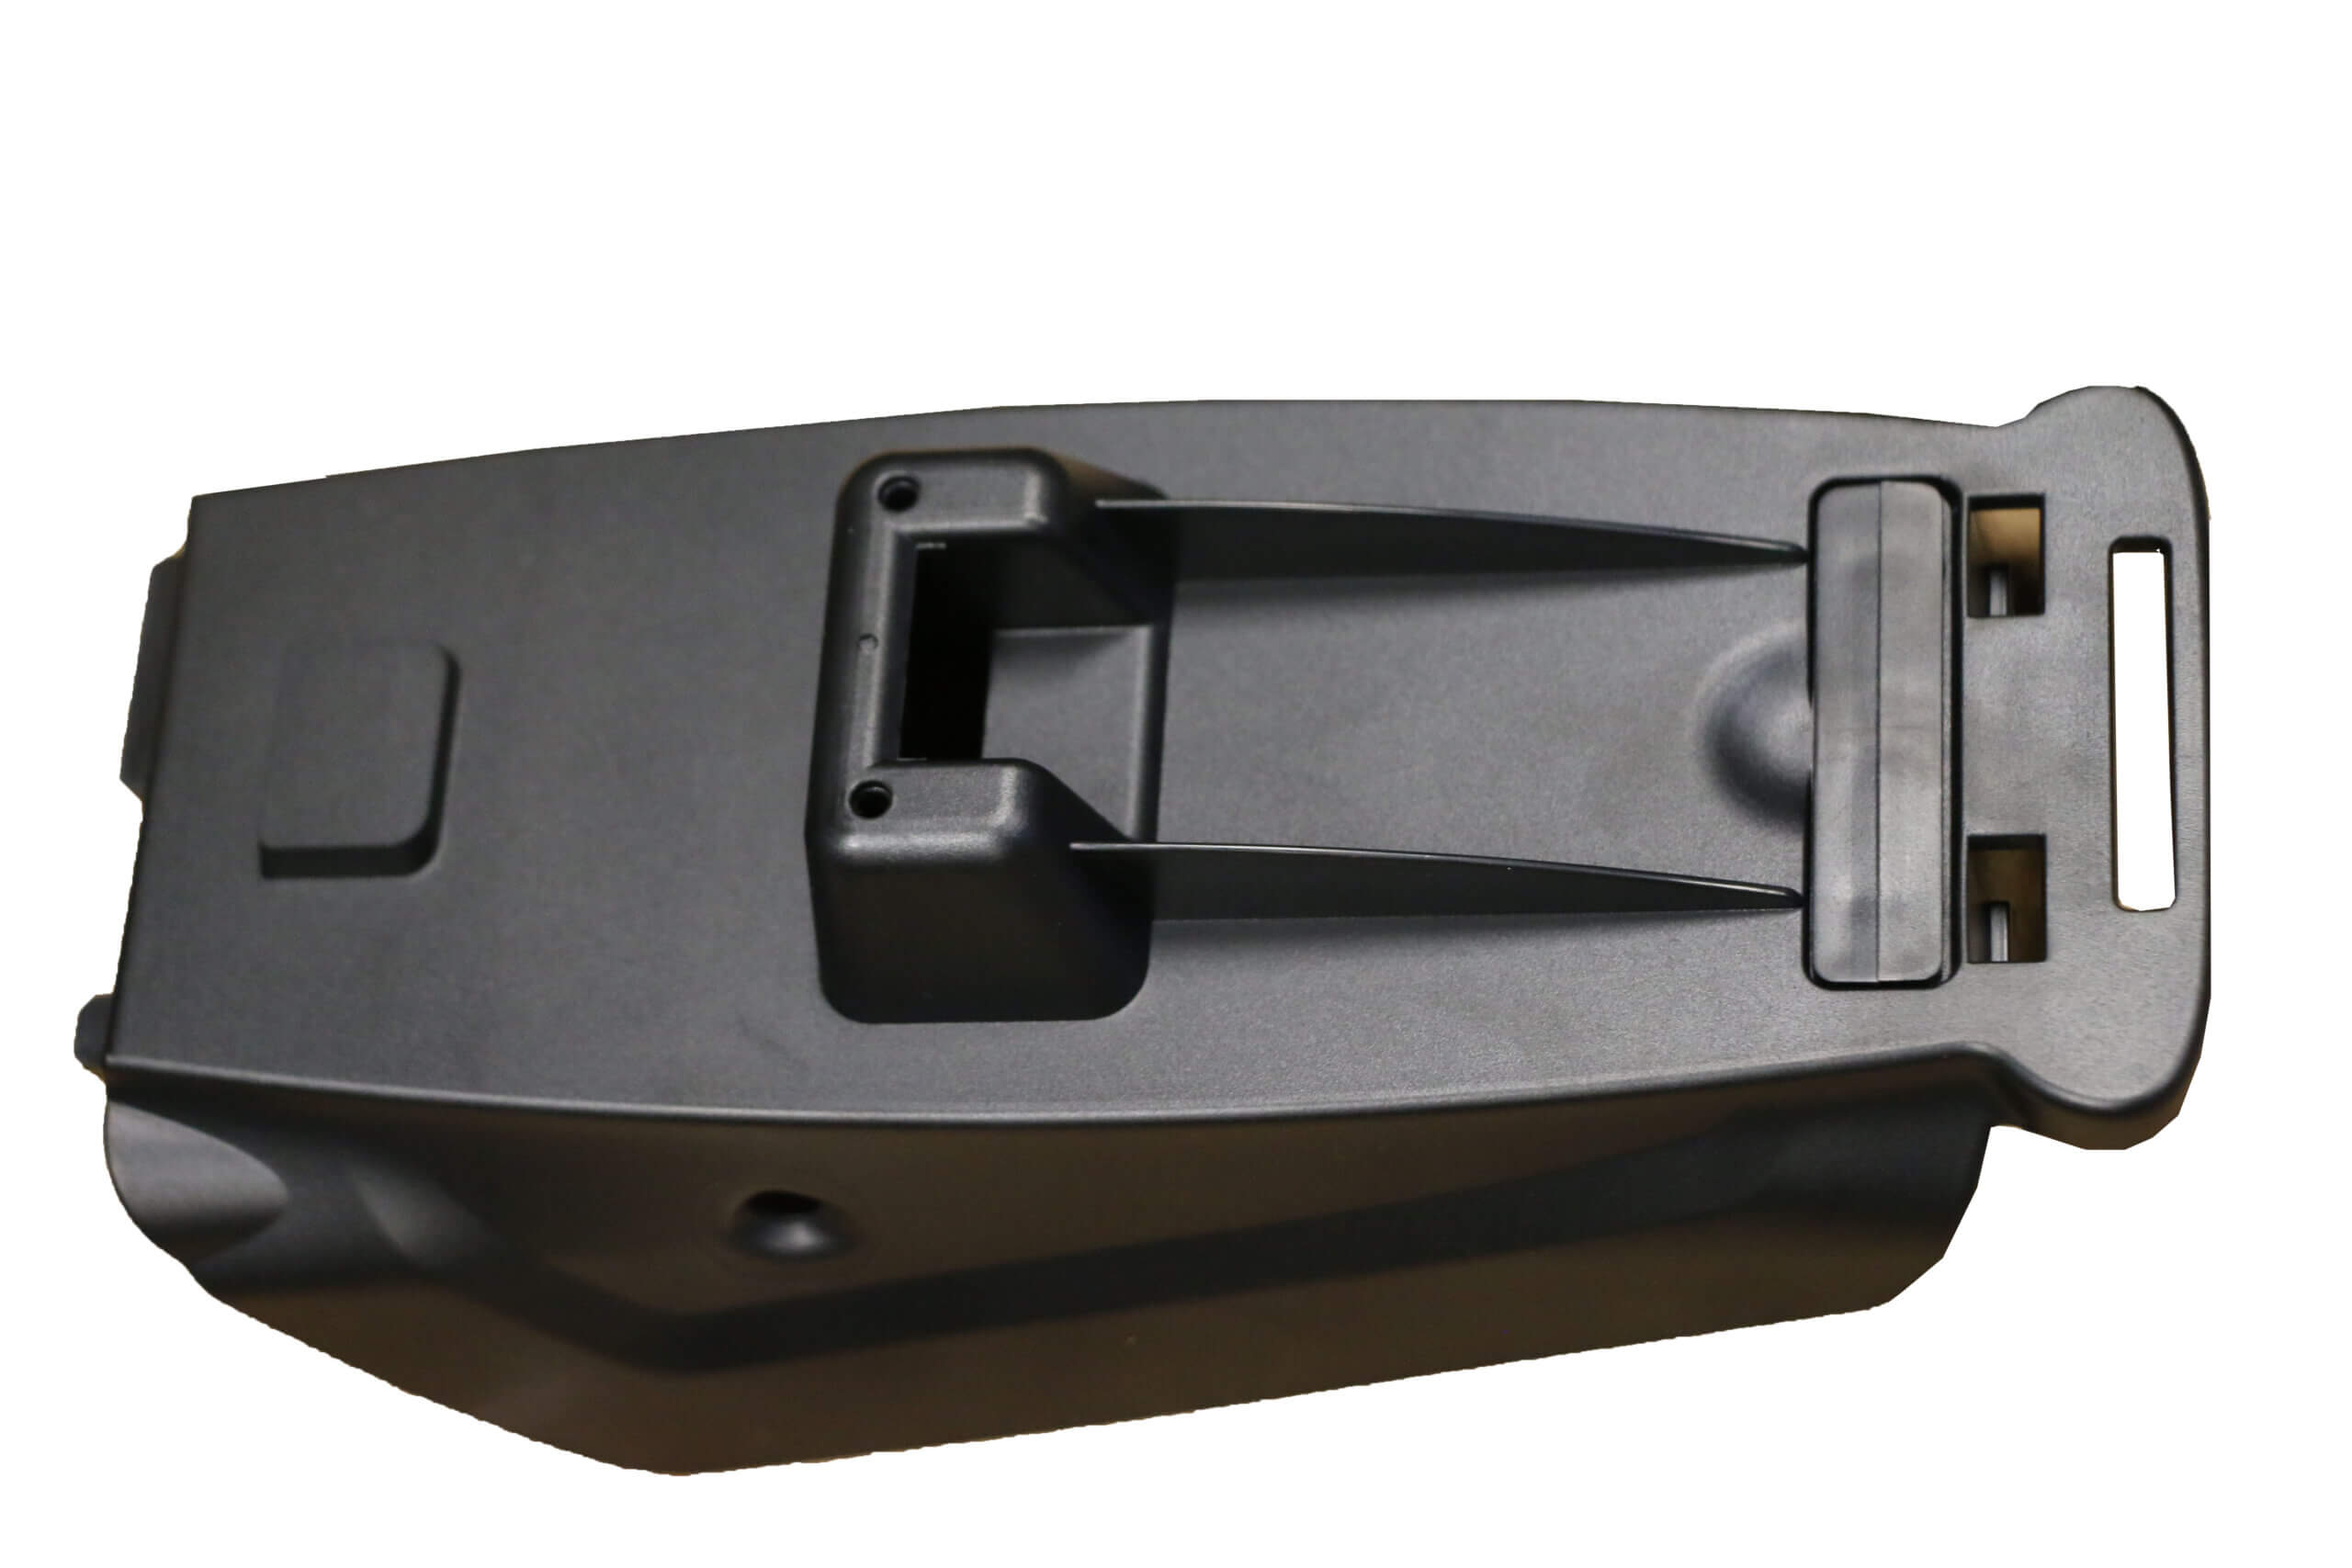 FlexiPole Backplate for Ingenico Desk 3500, 5000 & 1500 Payment Terminals